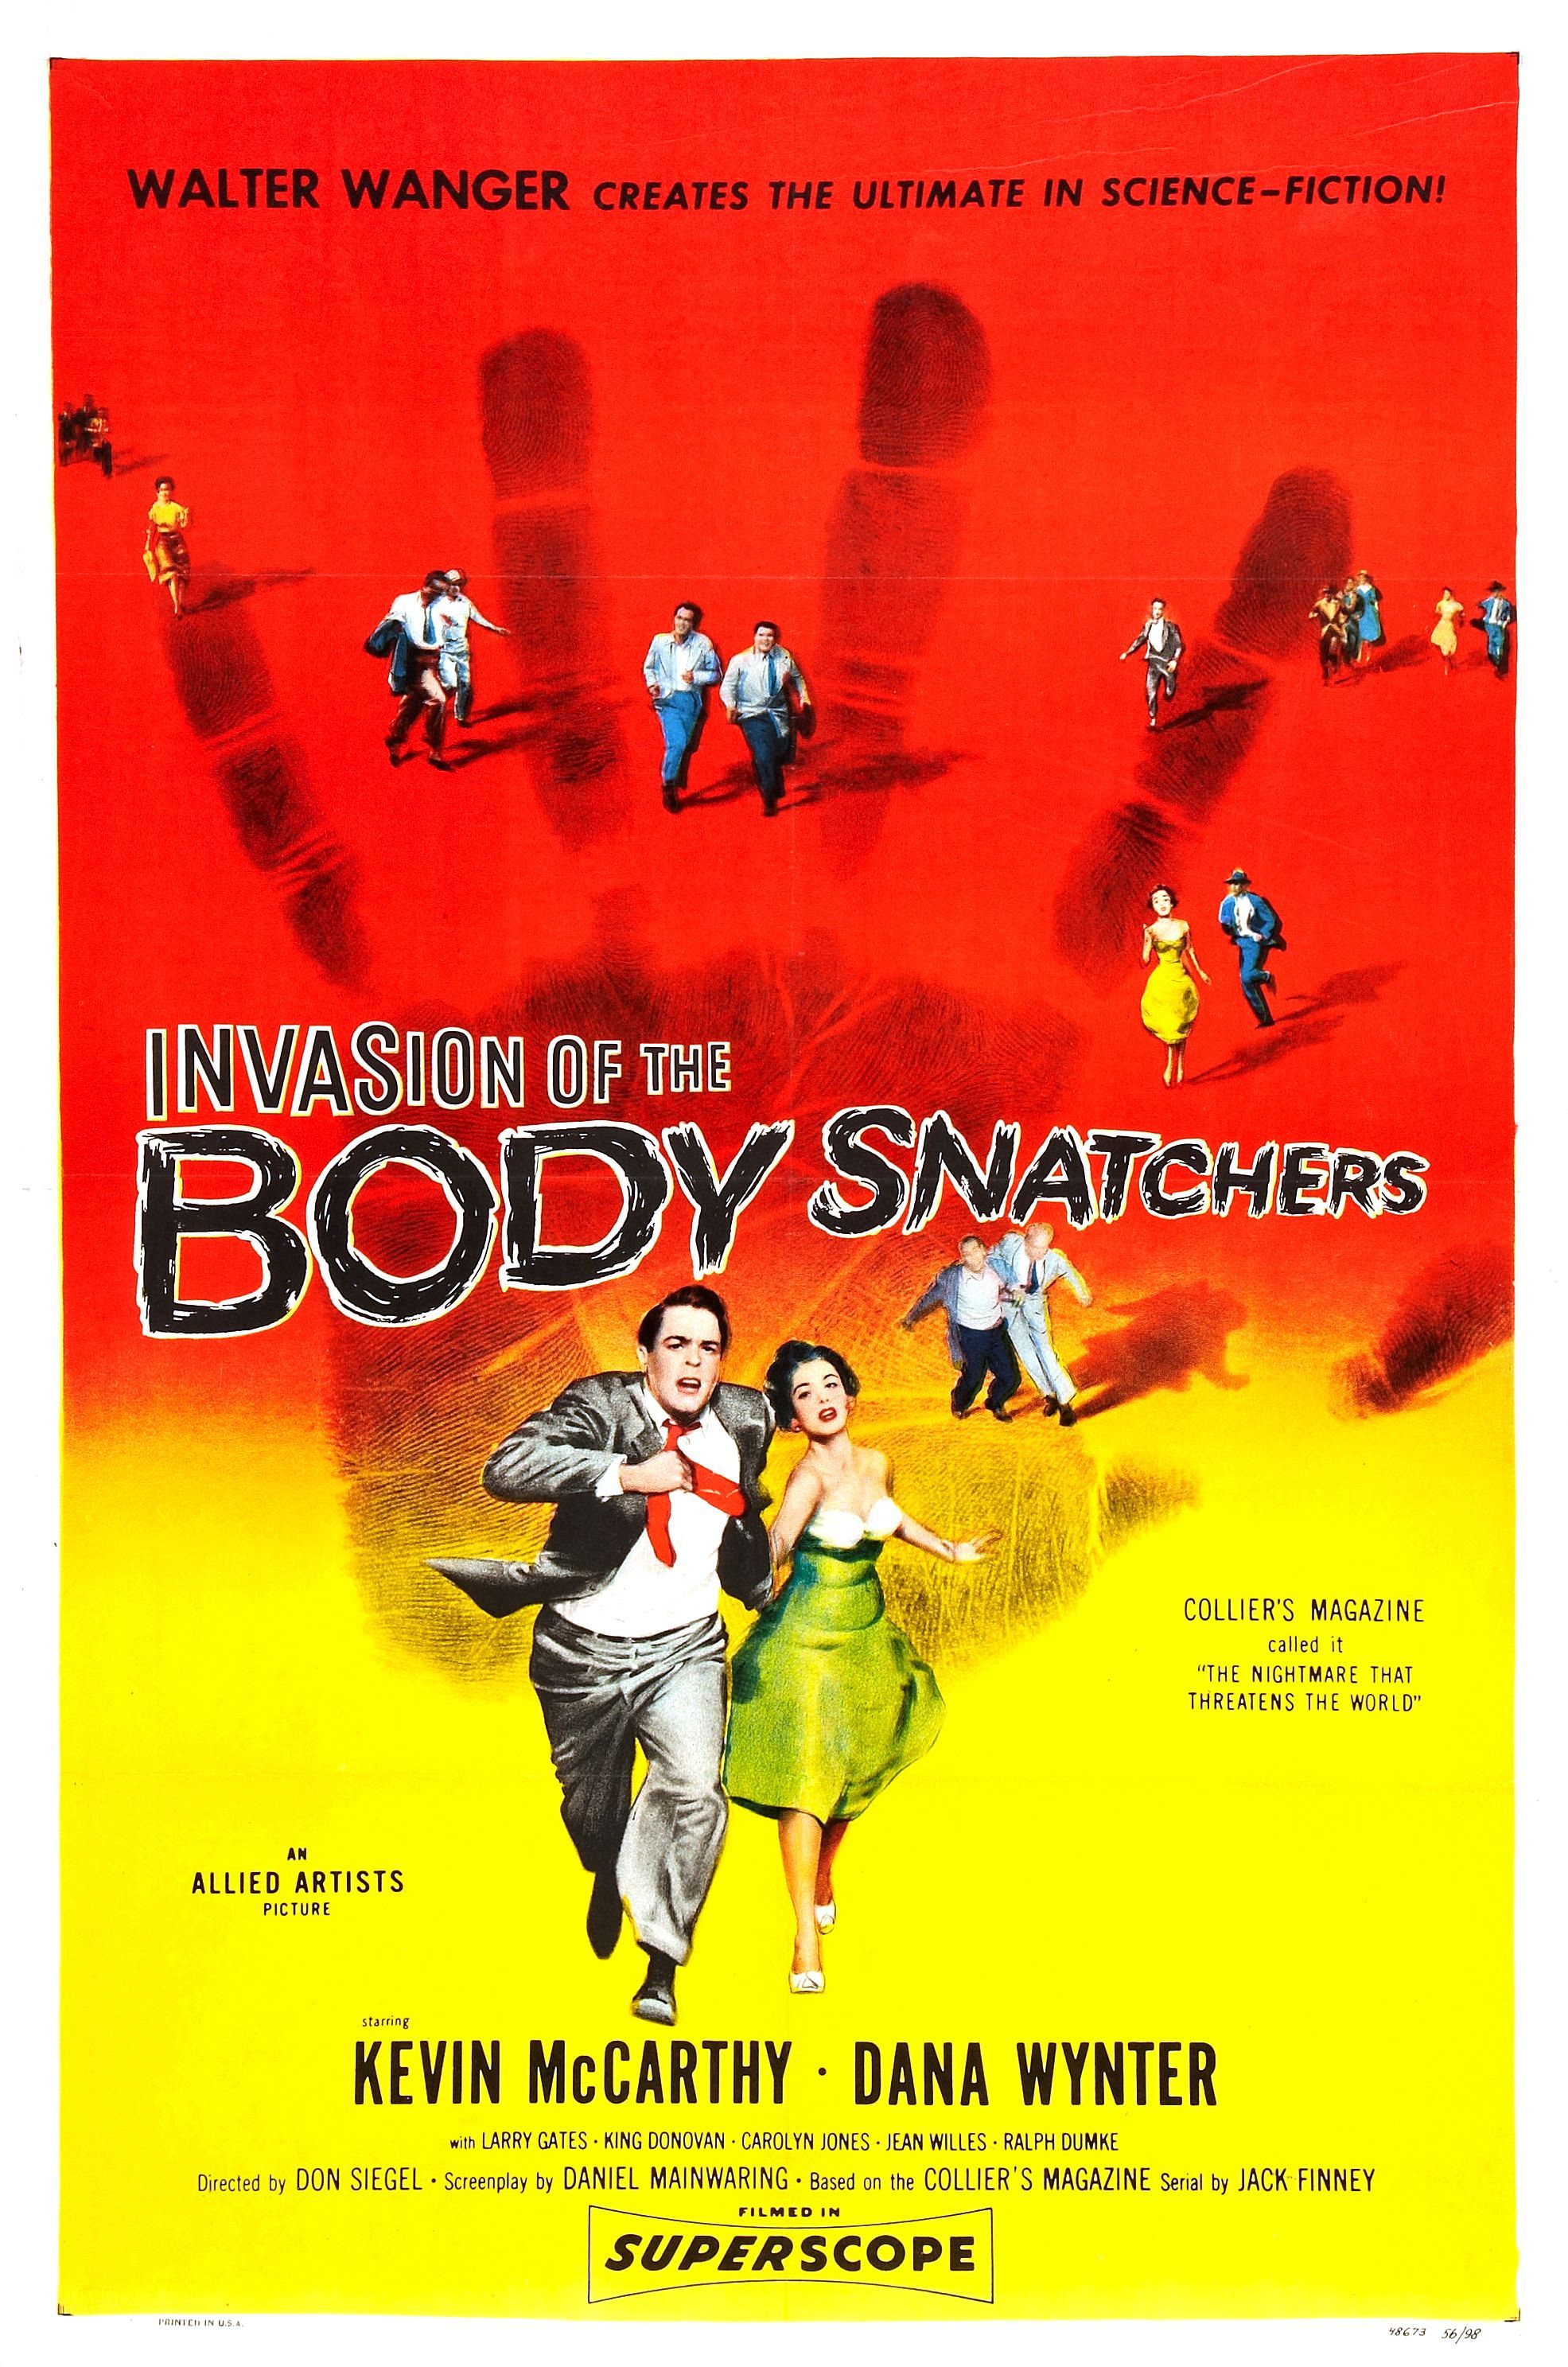 Invasion of the Body Snatchers Film Poster